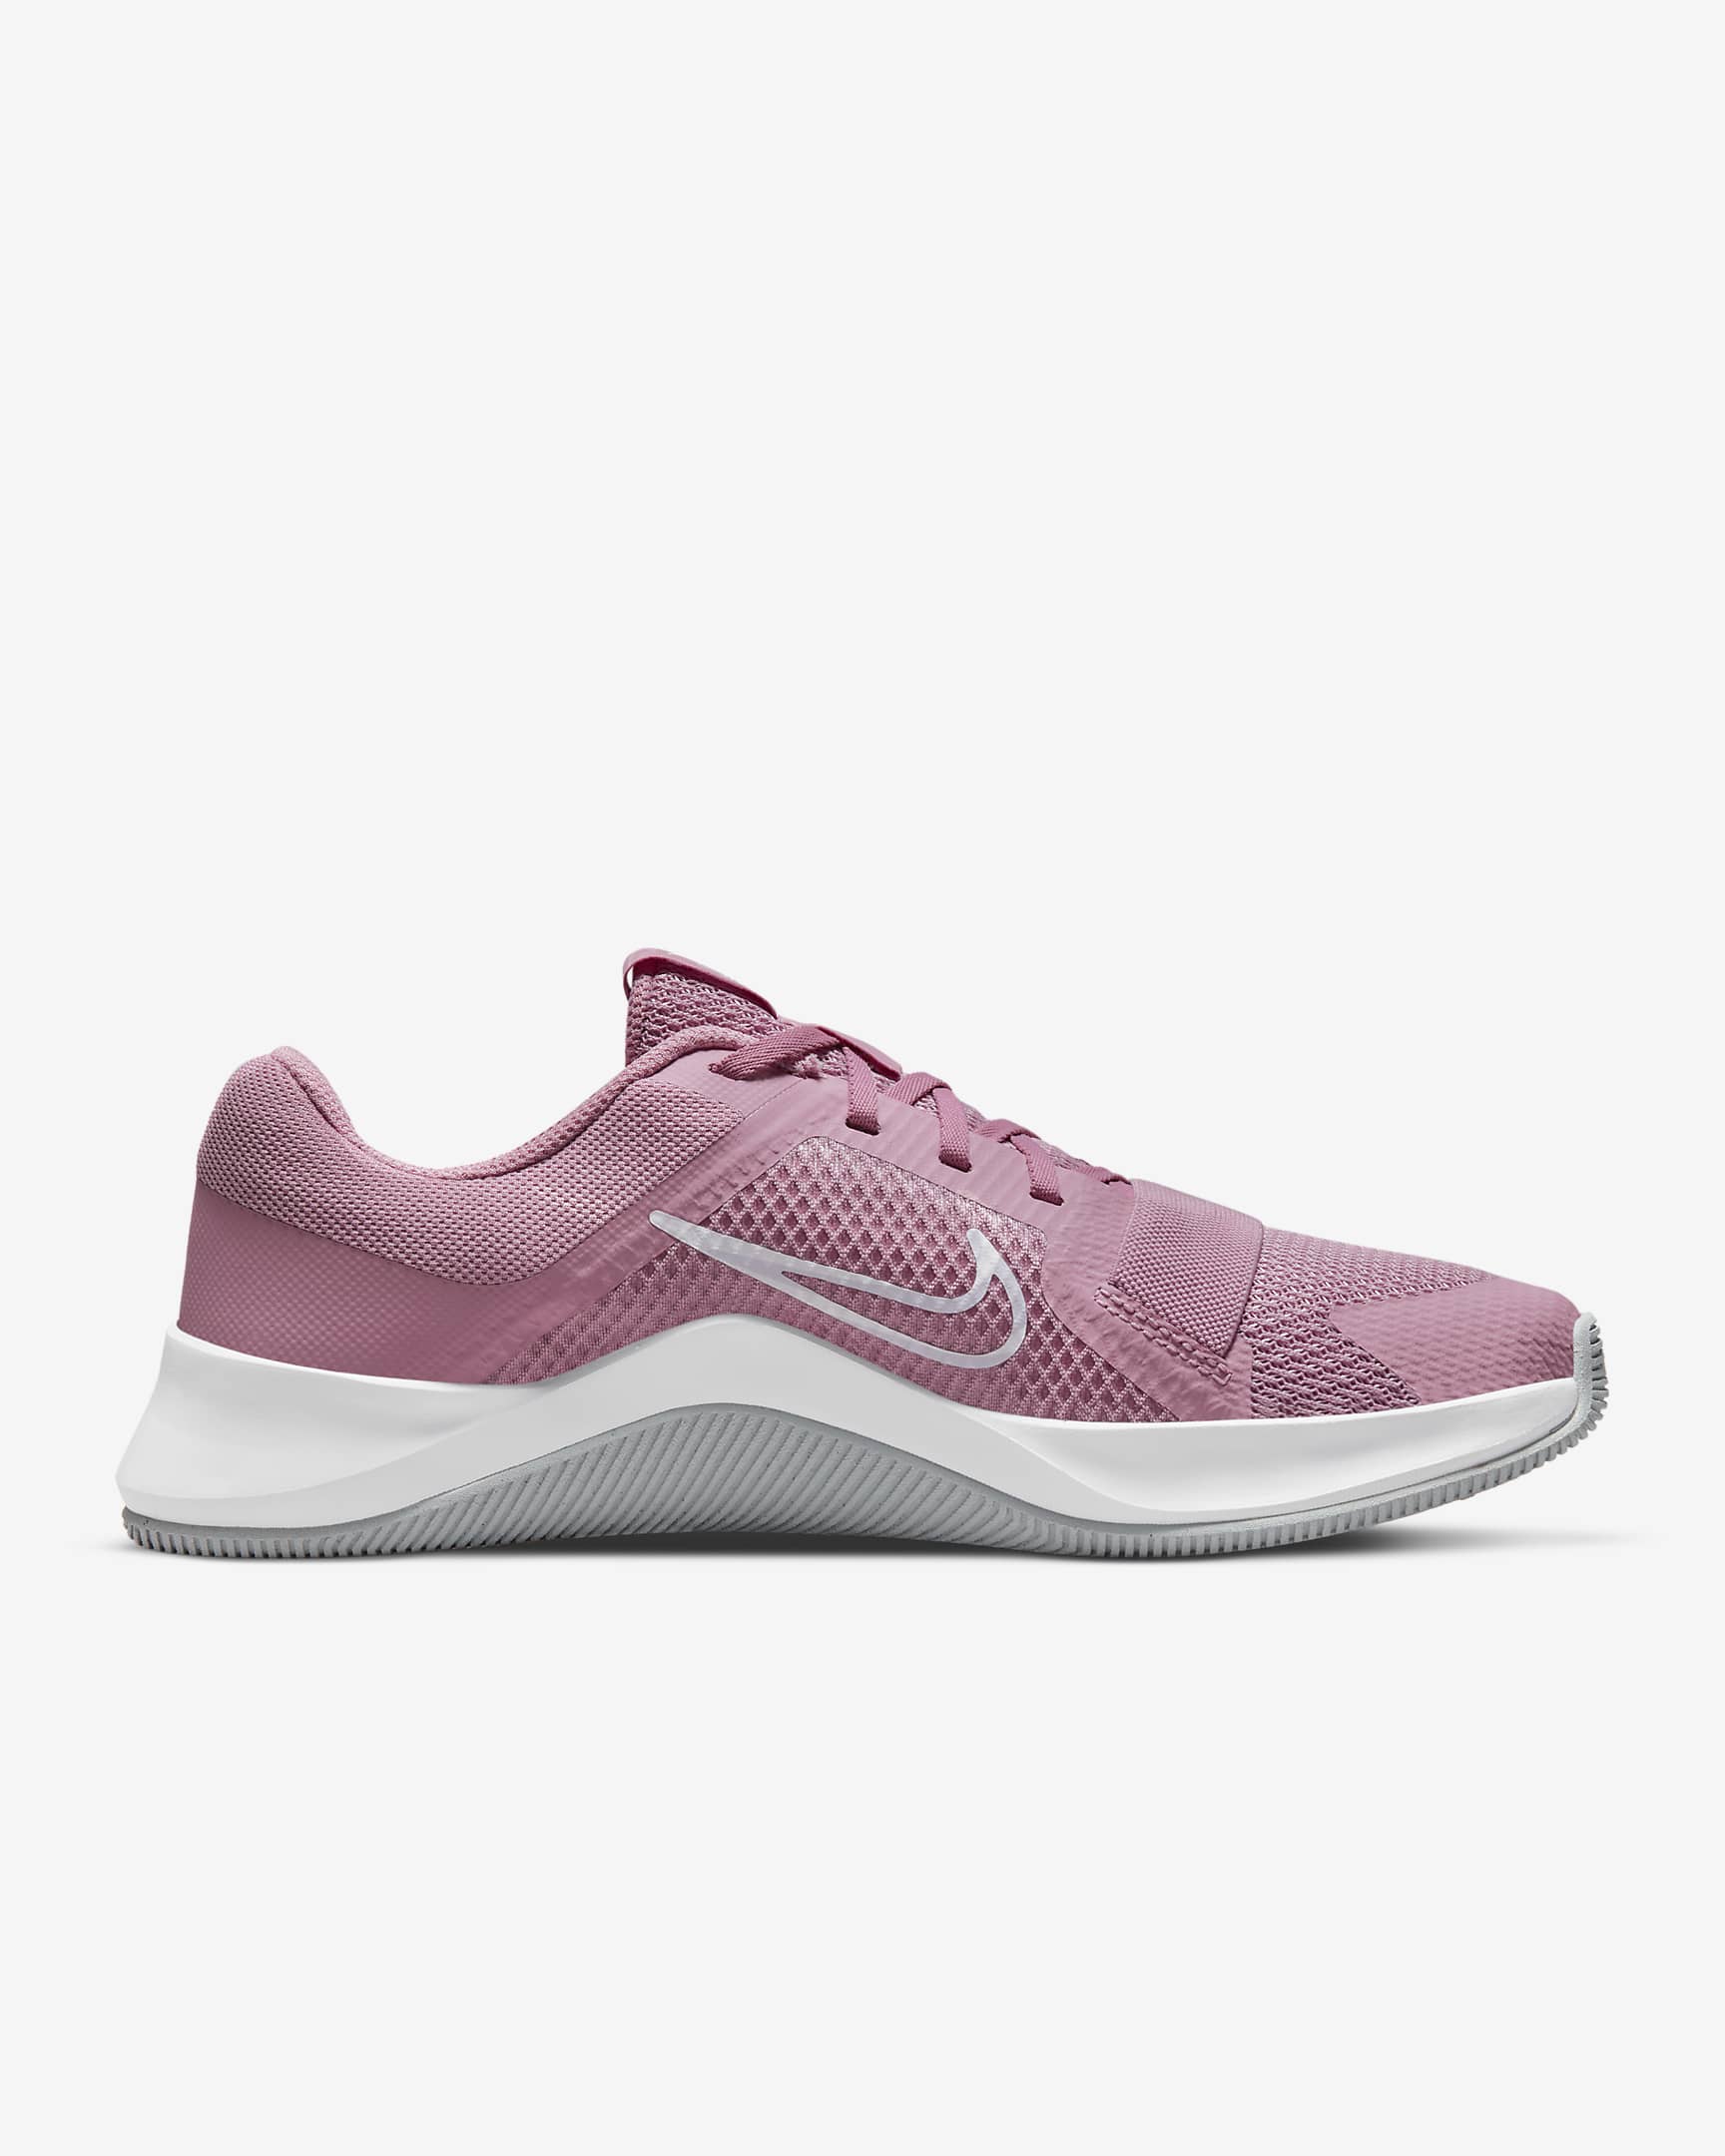 Nike MC Trainer 2 Women's Workout Shoes. Nike HR